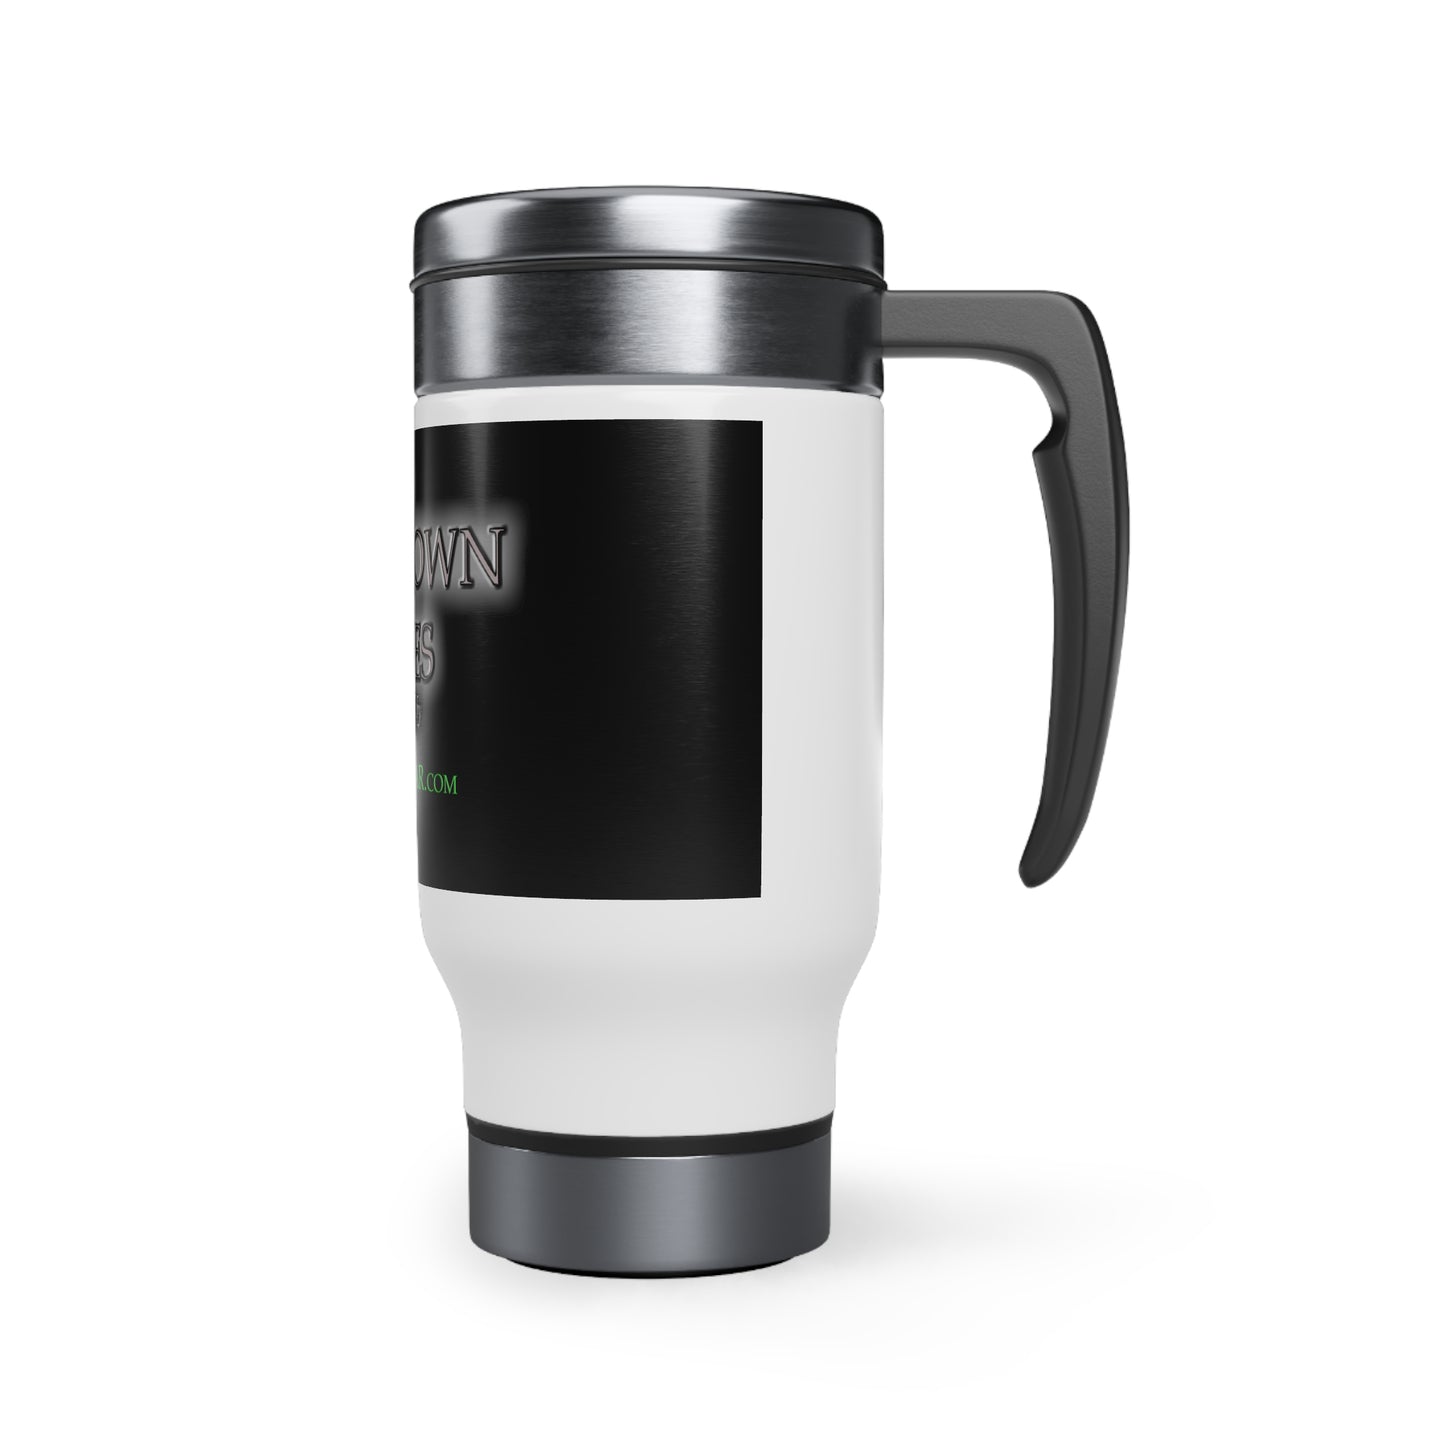 WAR-TOWN TIMES -Stainless Steel Travel Mug with Handle, 14oz-